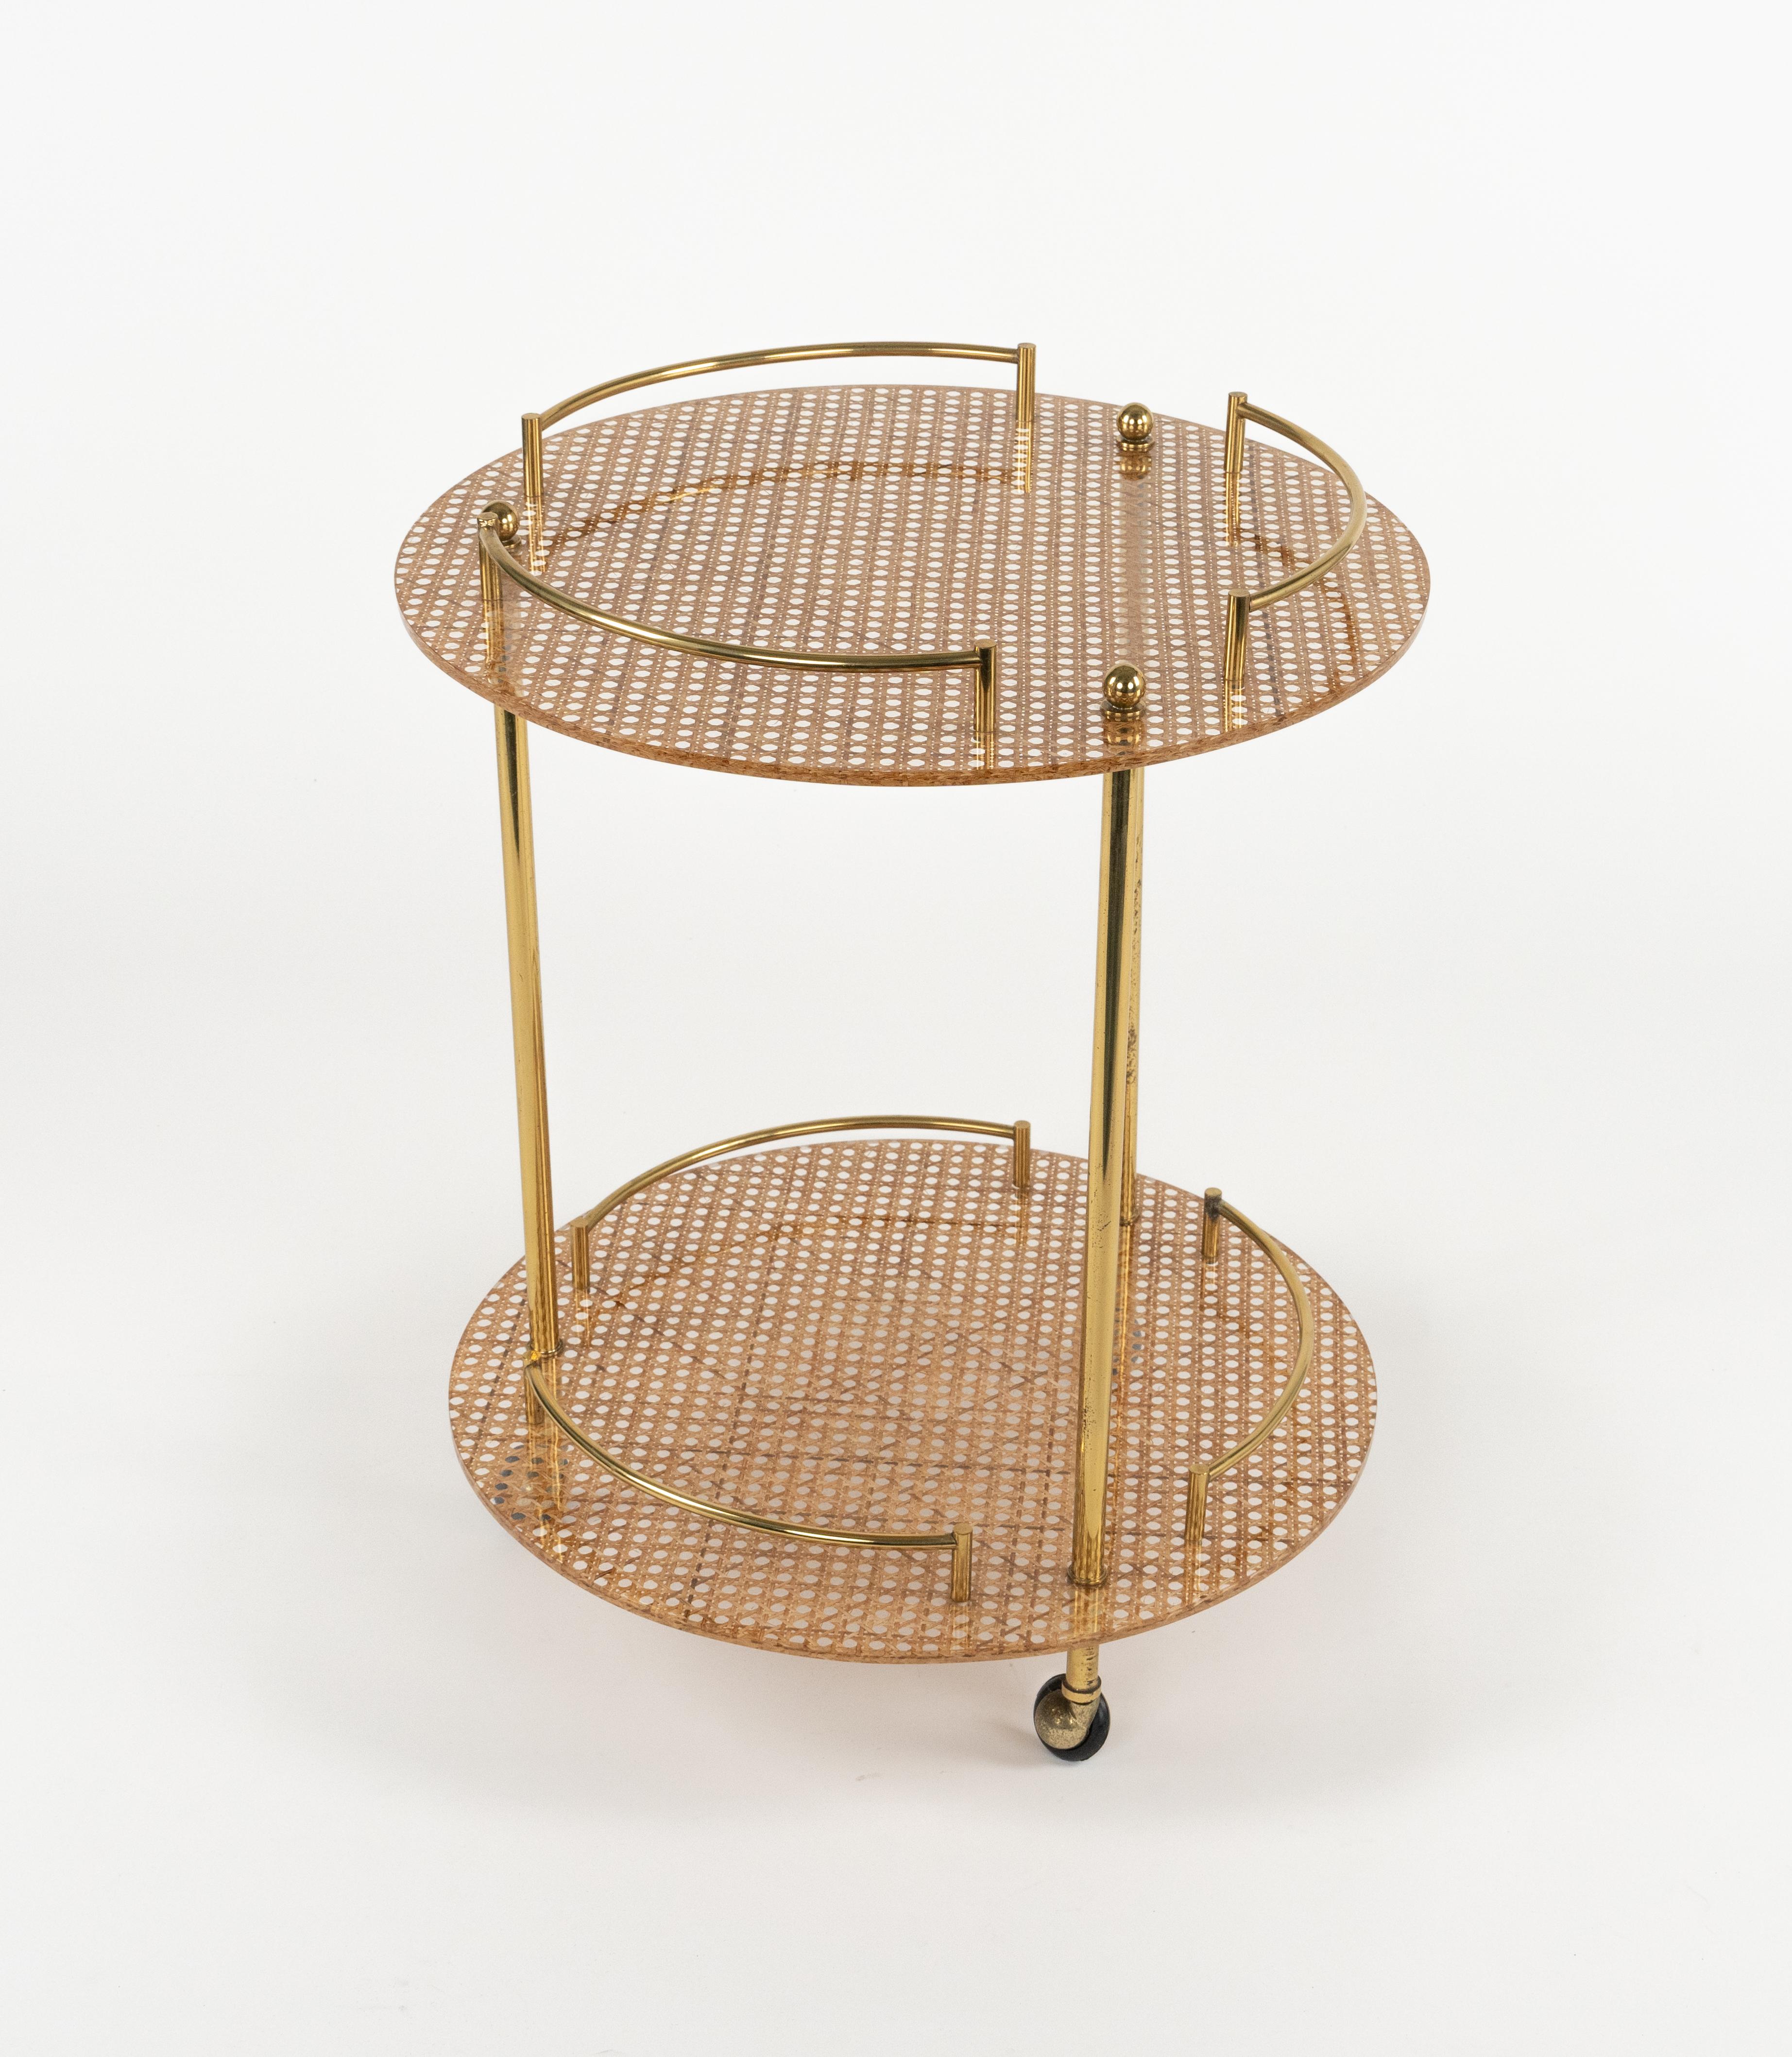 Italian Serving Bar Cart in Lucite, Brass and Rattan Christian Dior Style, Italy 1970s For Sale